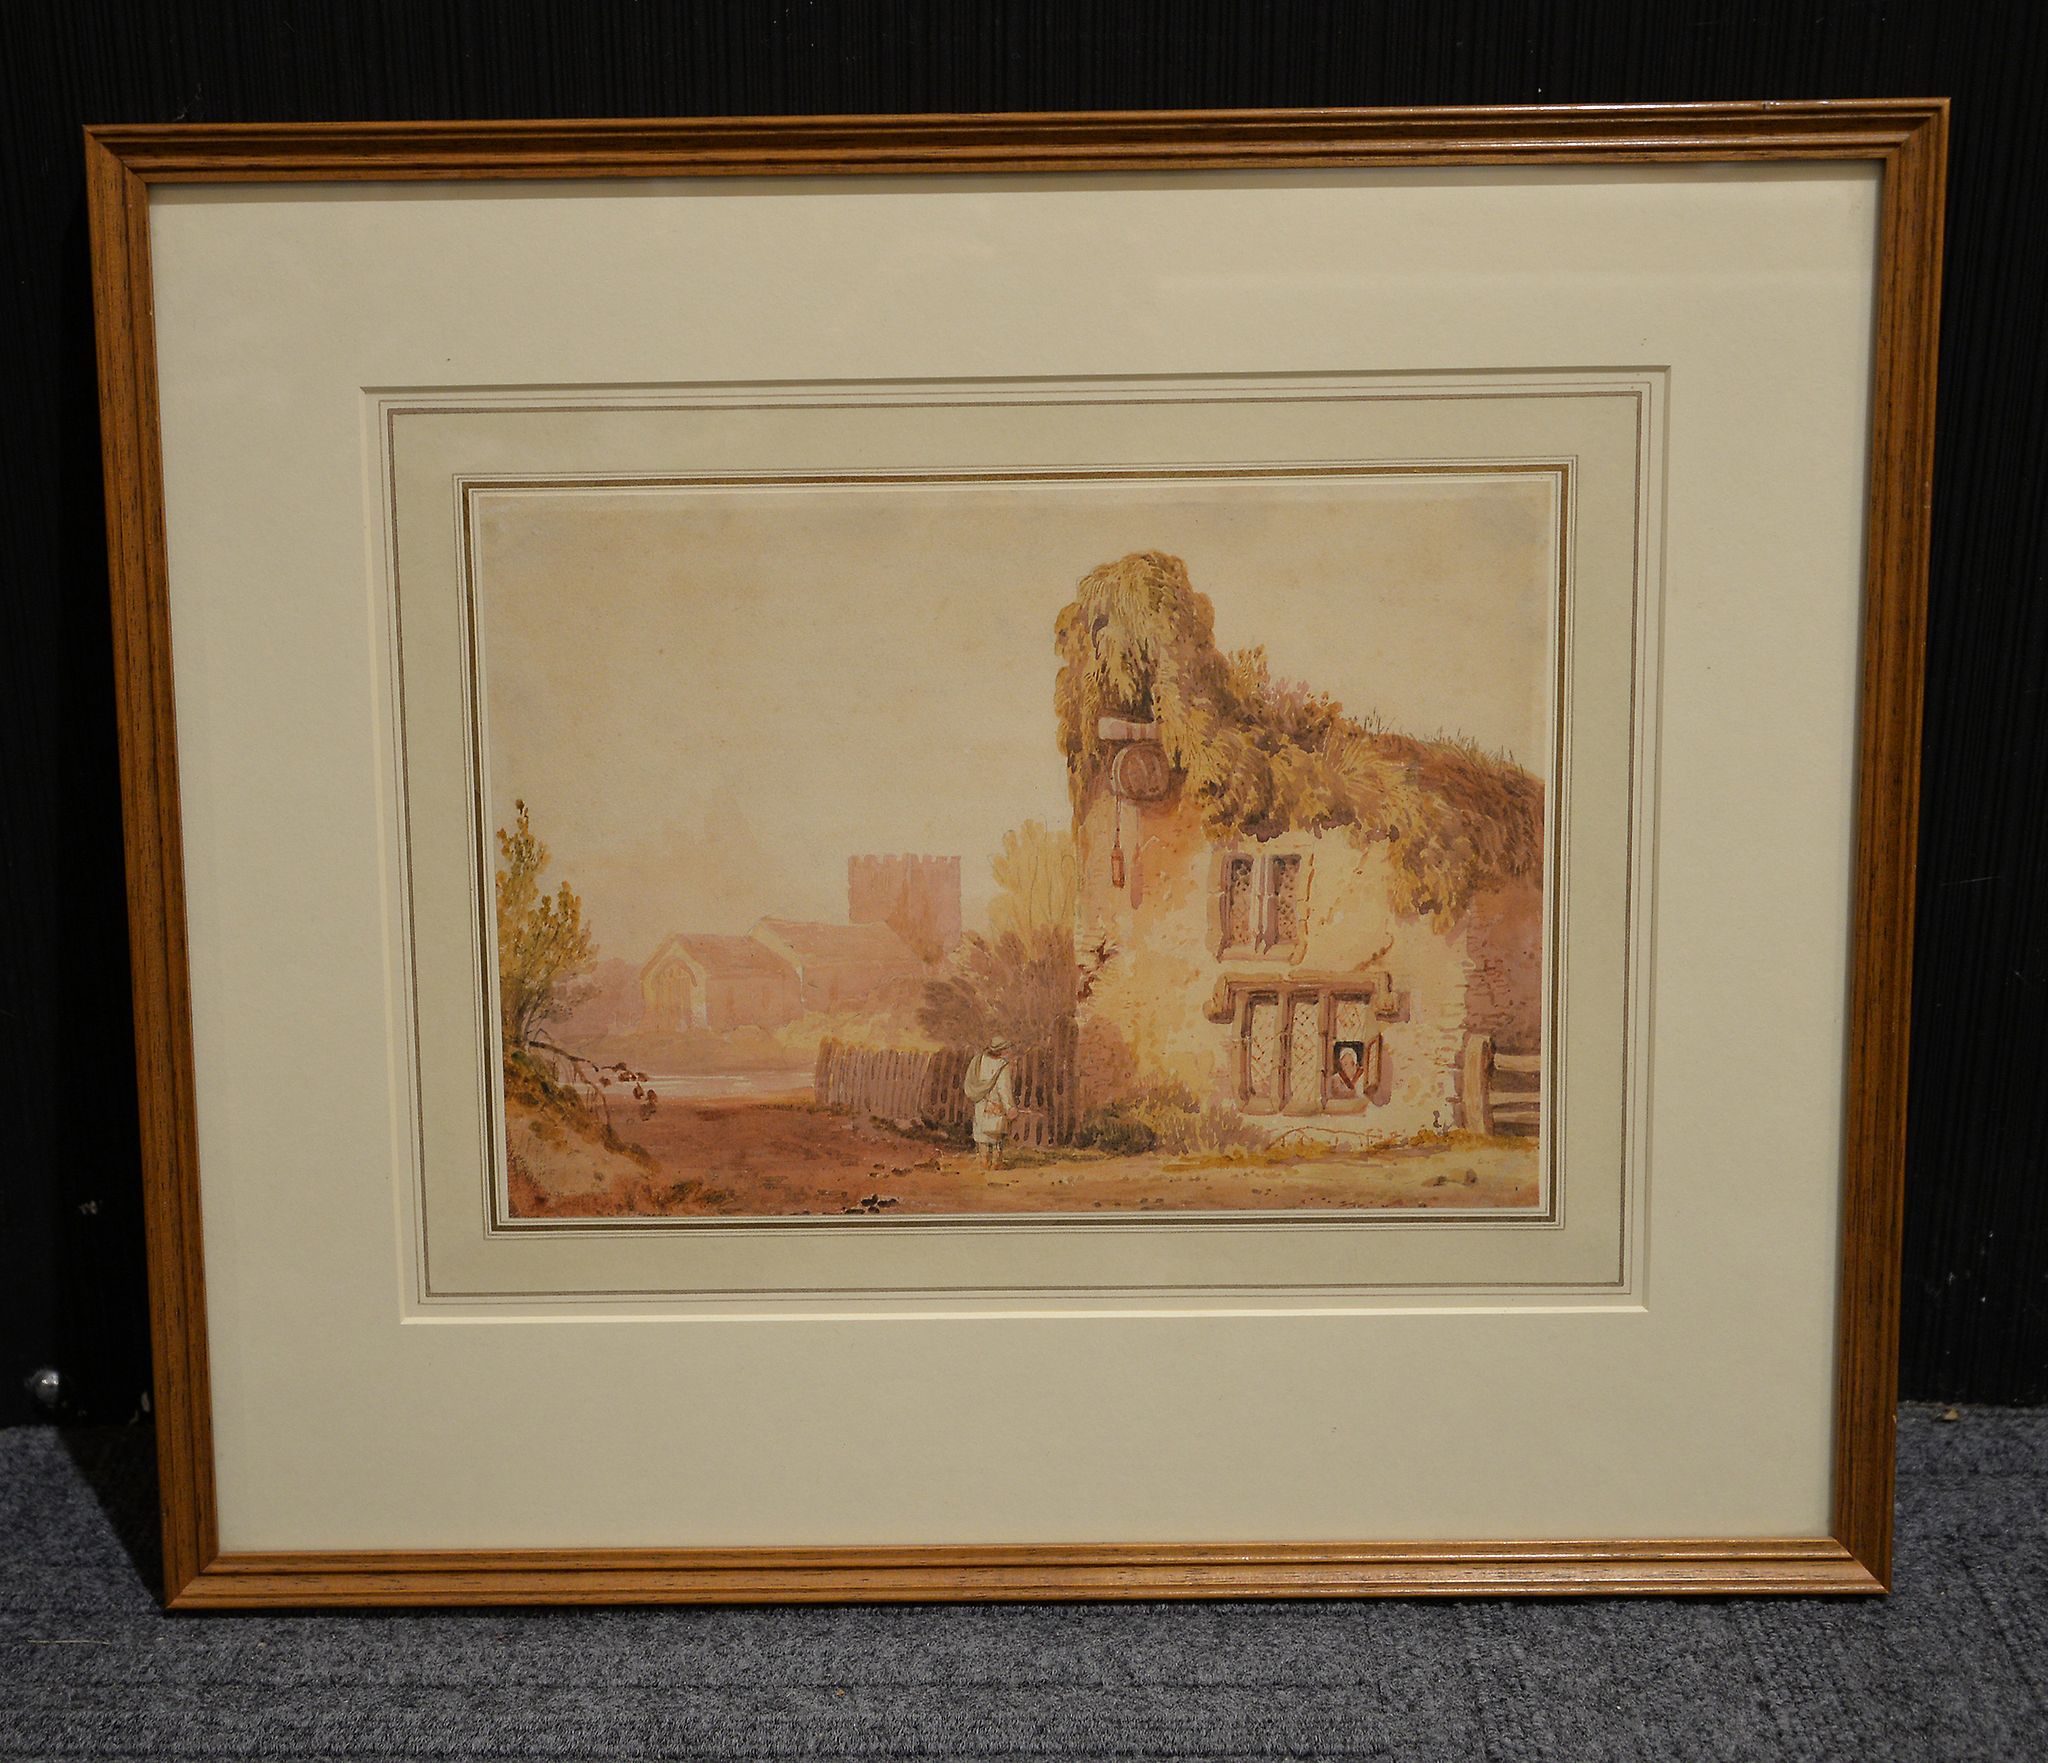 Circle of John Varley (1778-1842) Traveller by a ruined inn Watercolour 20 x 30cm (7 7/8 x 12in.)